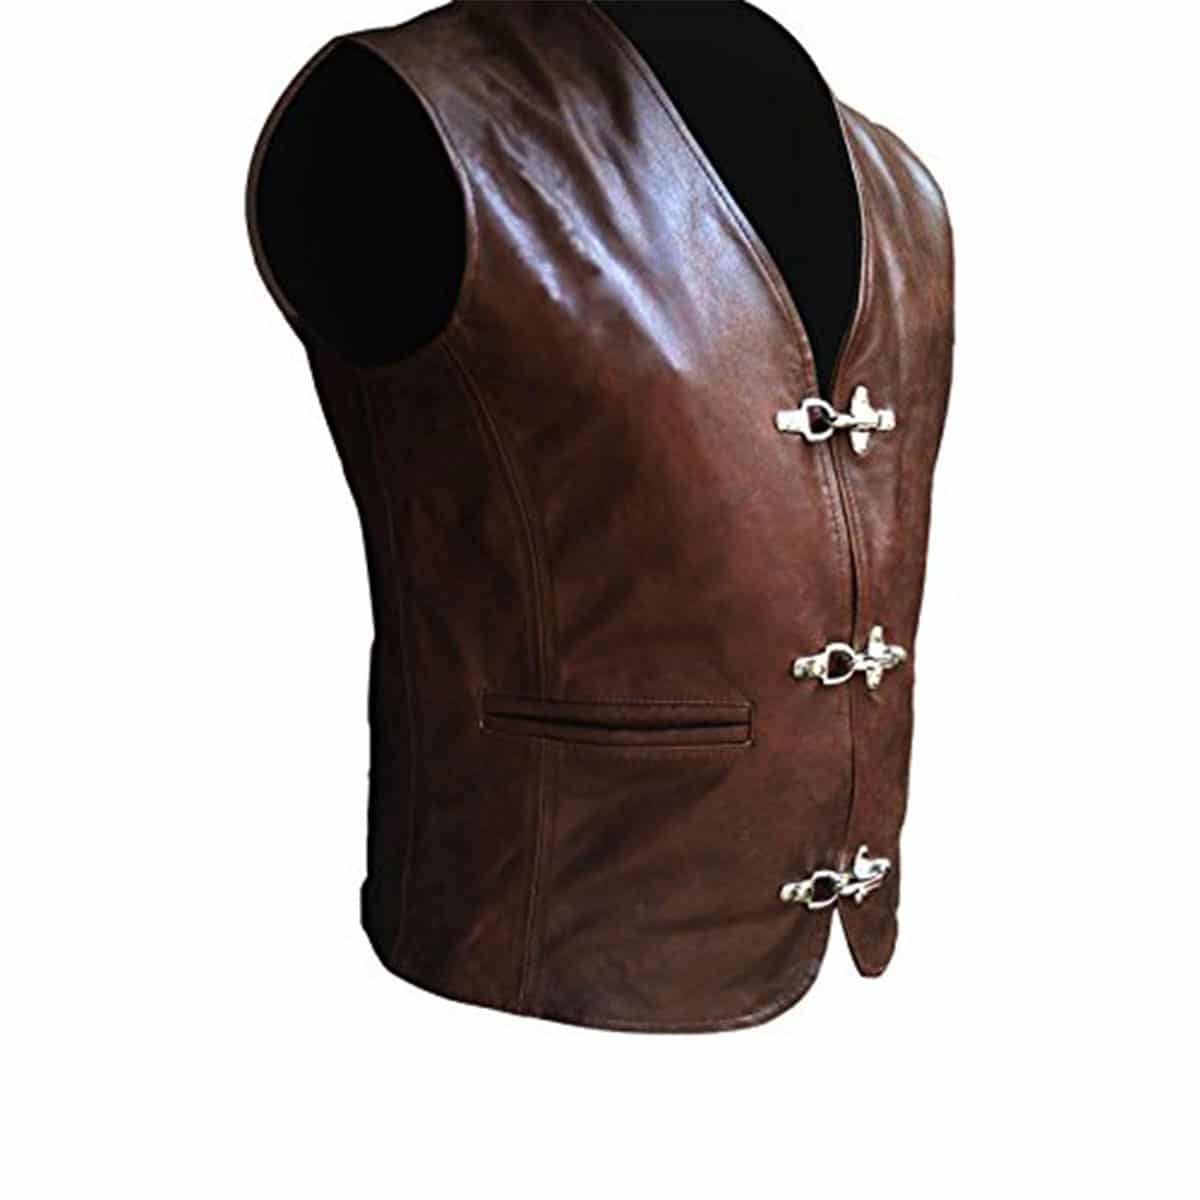 Mens Bikers Vest Genuine Cow Leather Brown Waistcoat with Chrome Hooks - CH-BRW